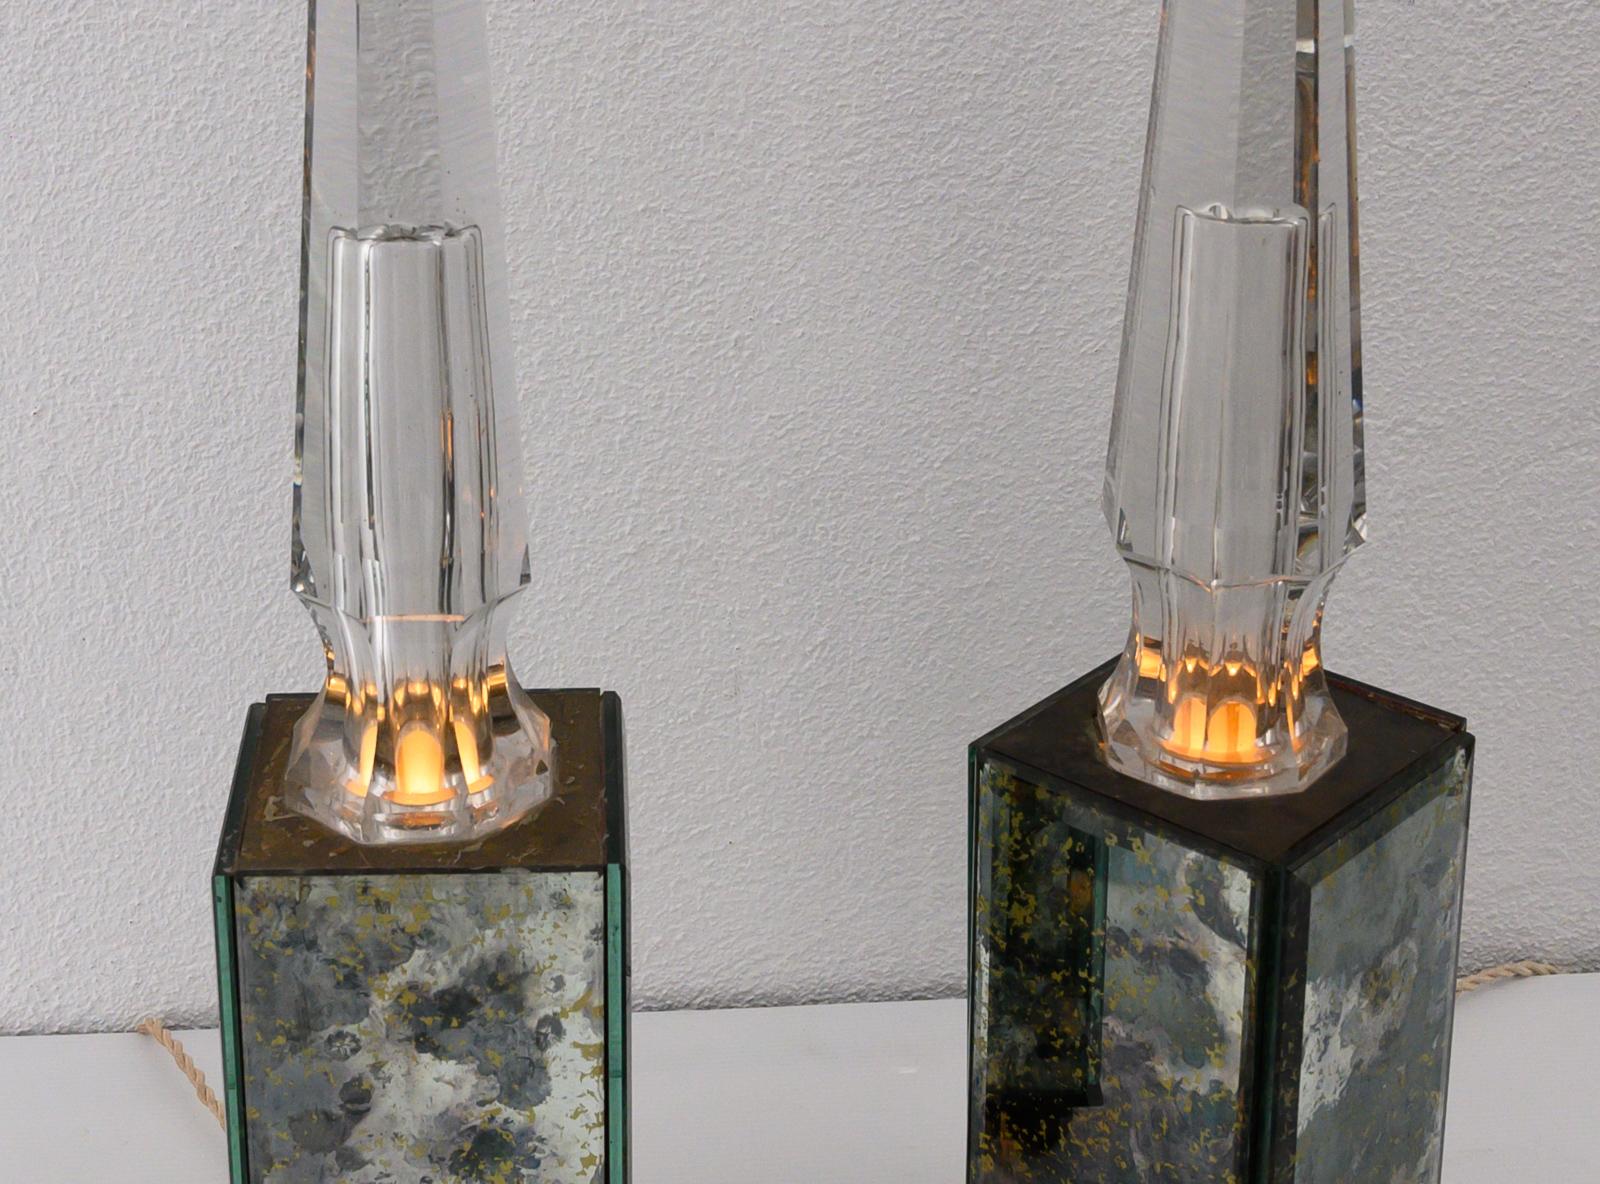 Stylish pair of mirrored and crystal obelisk lights in the style of Serge Roche attributed to Baccarat
France circa 1940 
Provenance: Ex-collection Serge Merlin, French actor, gained notoriety for his role in the film Amélie
( priced for the